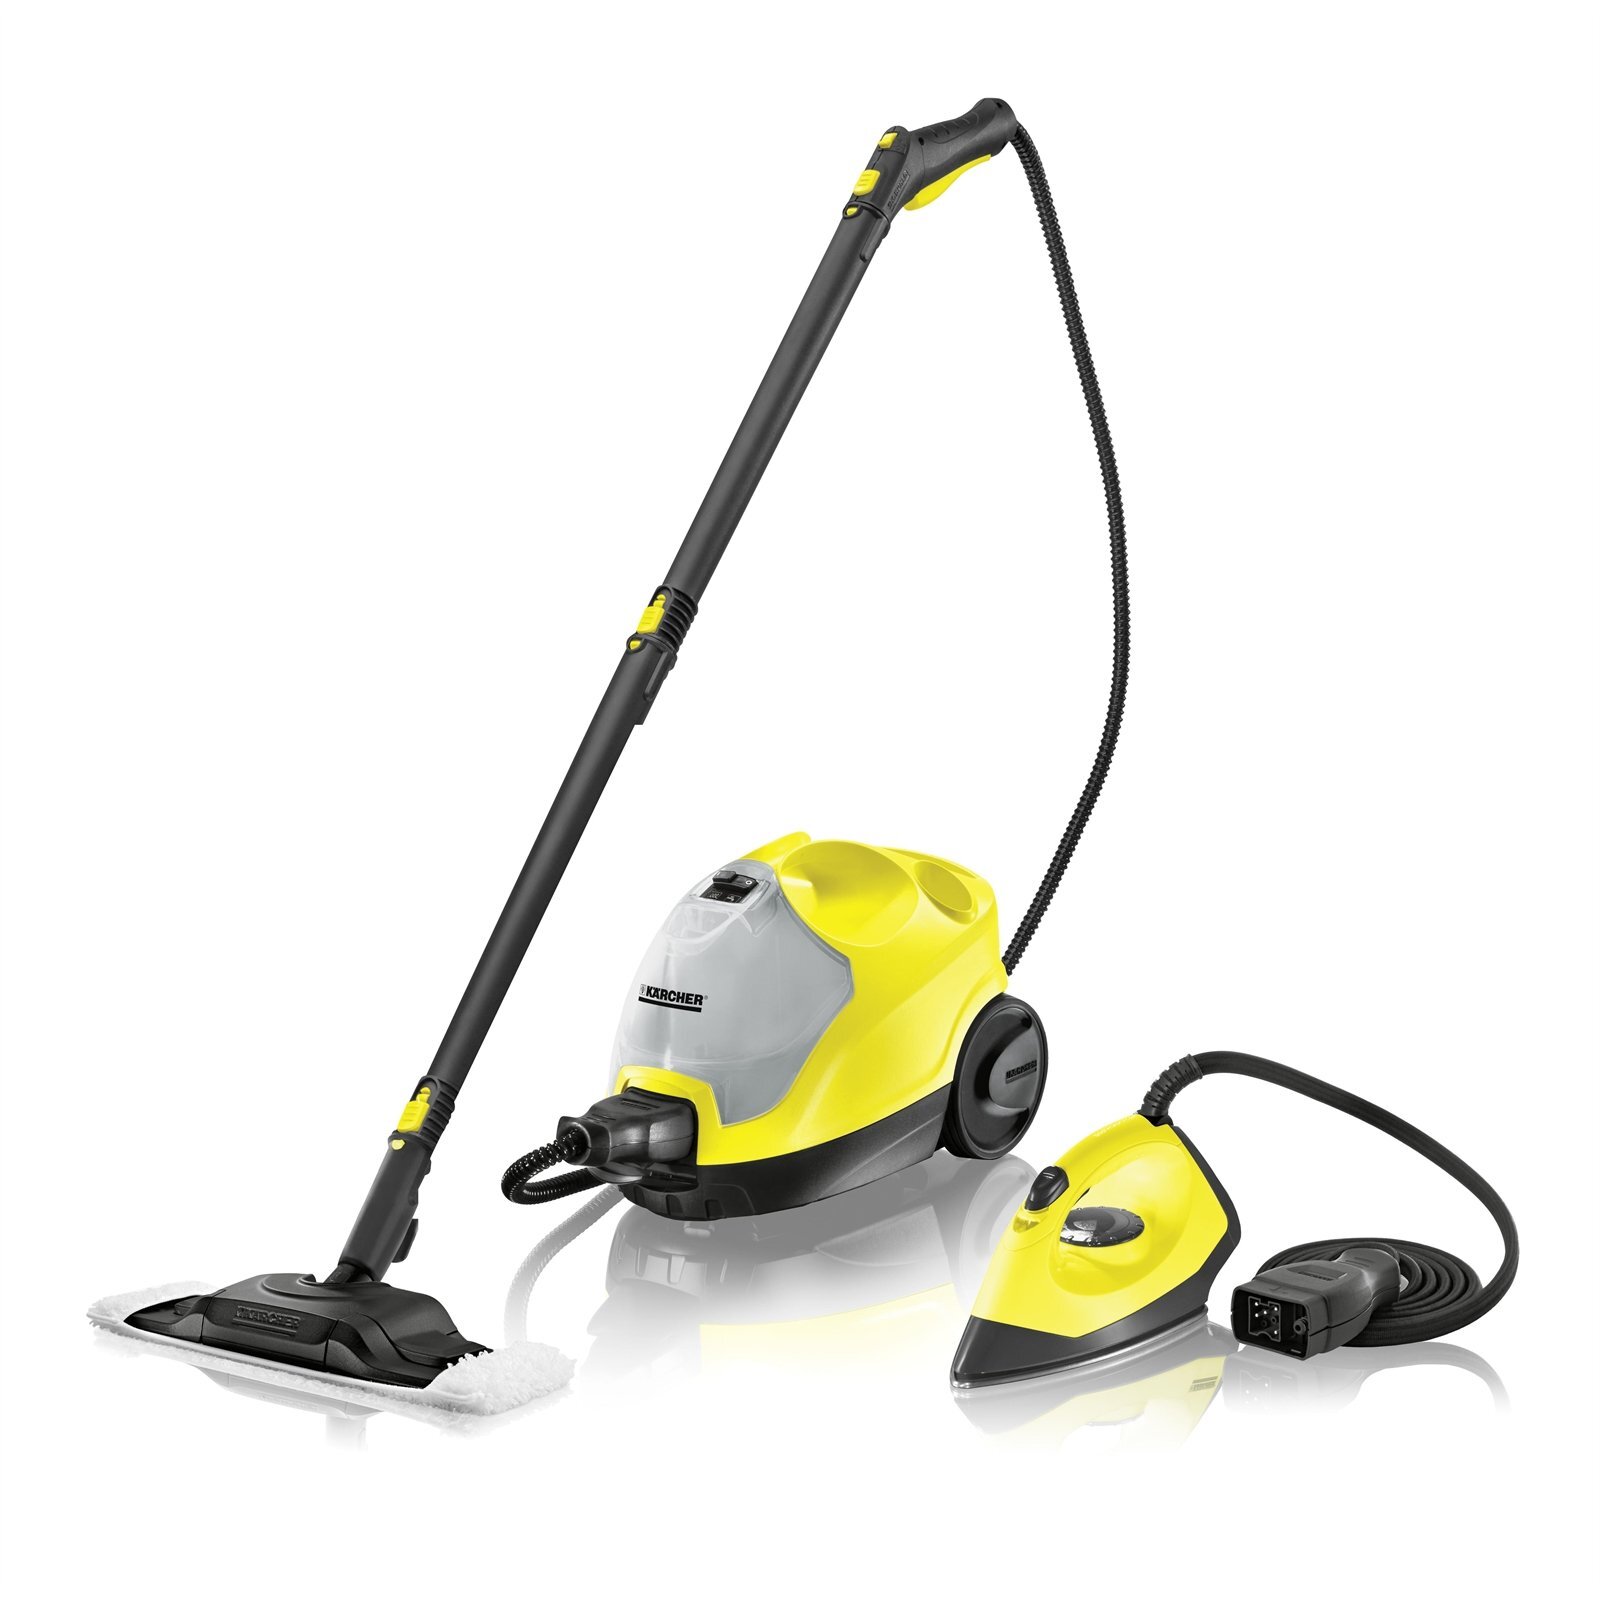 Kärcher - SC 3 Portable Multi-Surface Steam Cleaner/Steam Mop with  Attachments – Chemical-Free, Rapid 40 Second Heat-Up, Continuous Steam -  For Grout